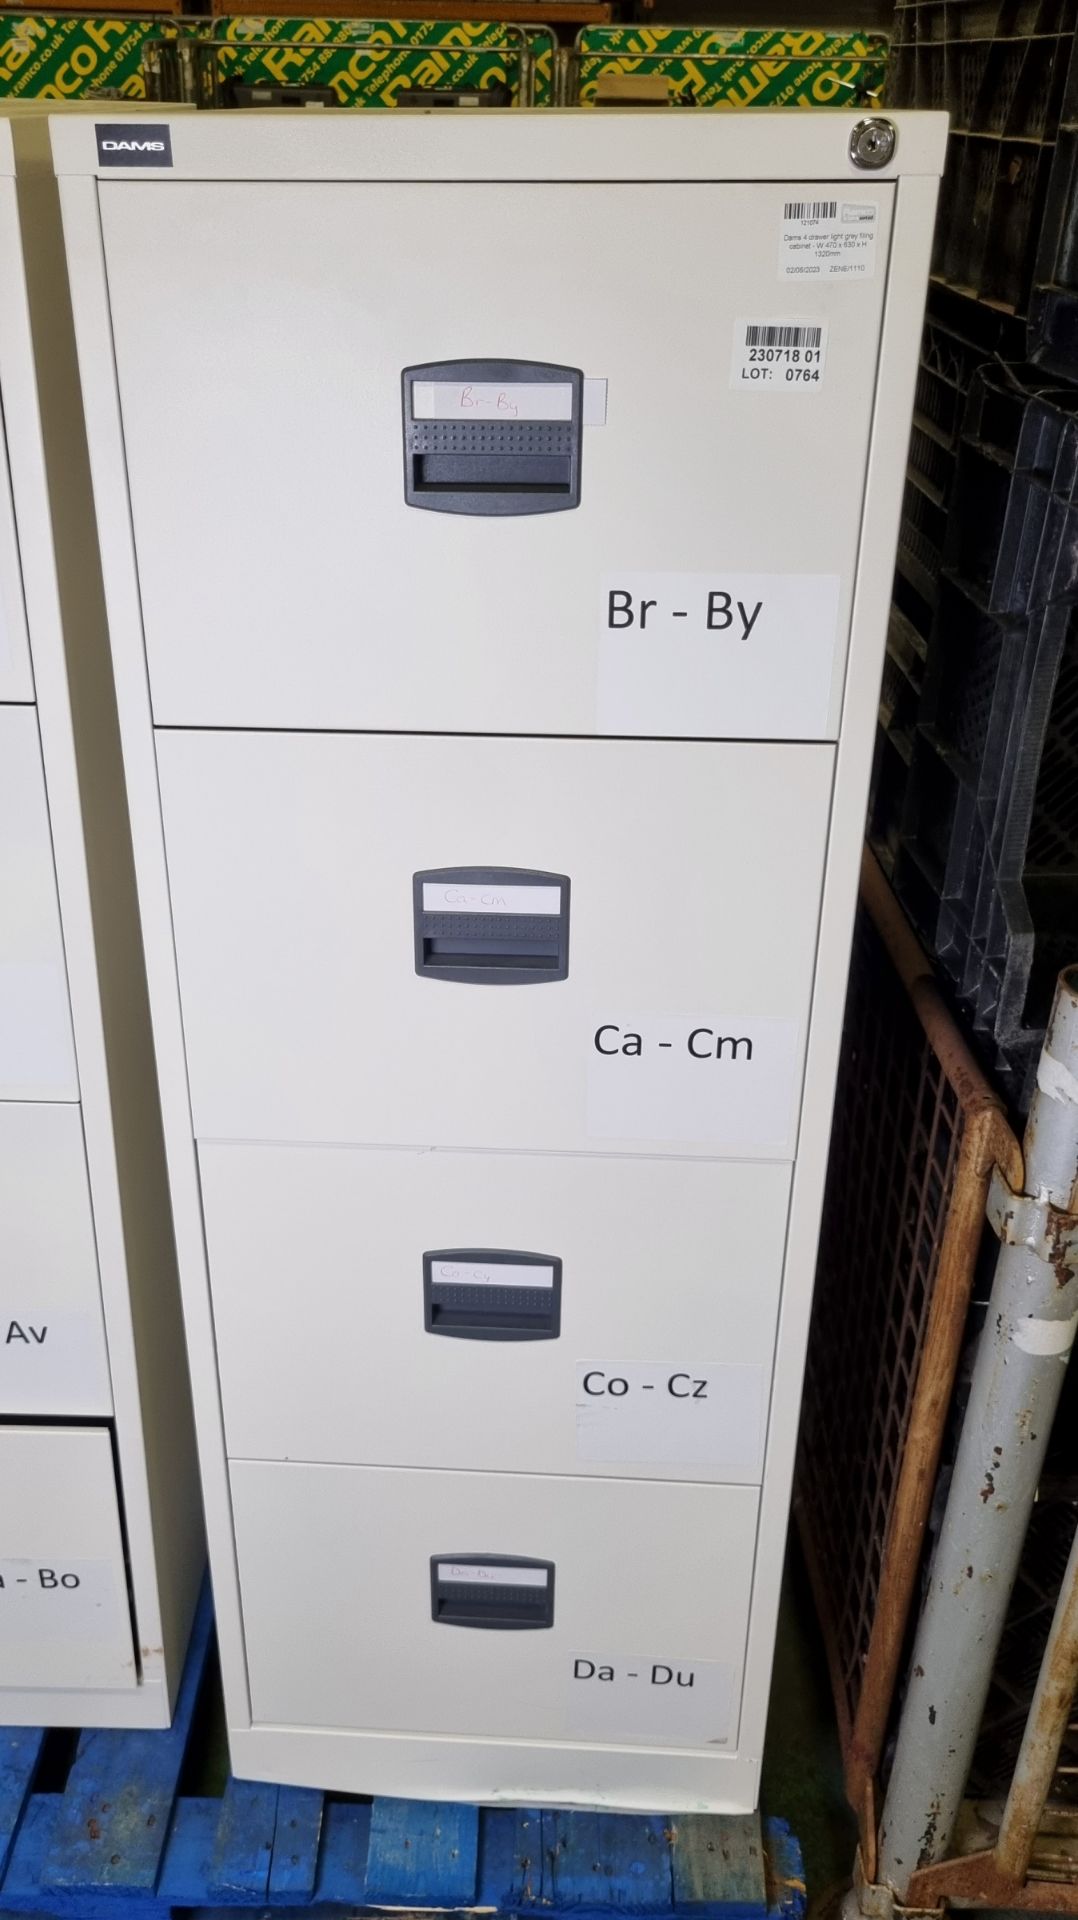 Office filing cabinets - details in the description